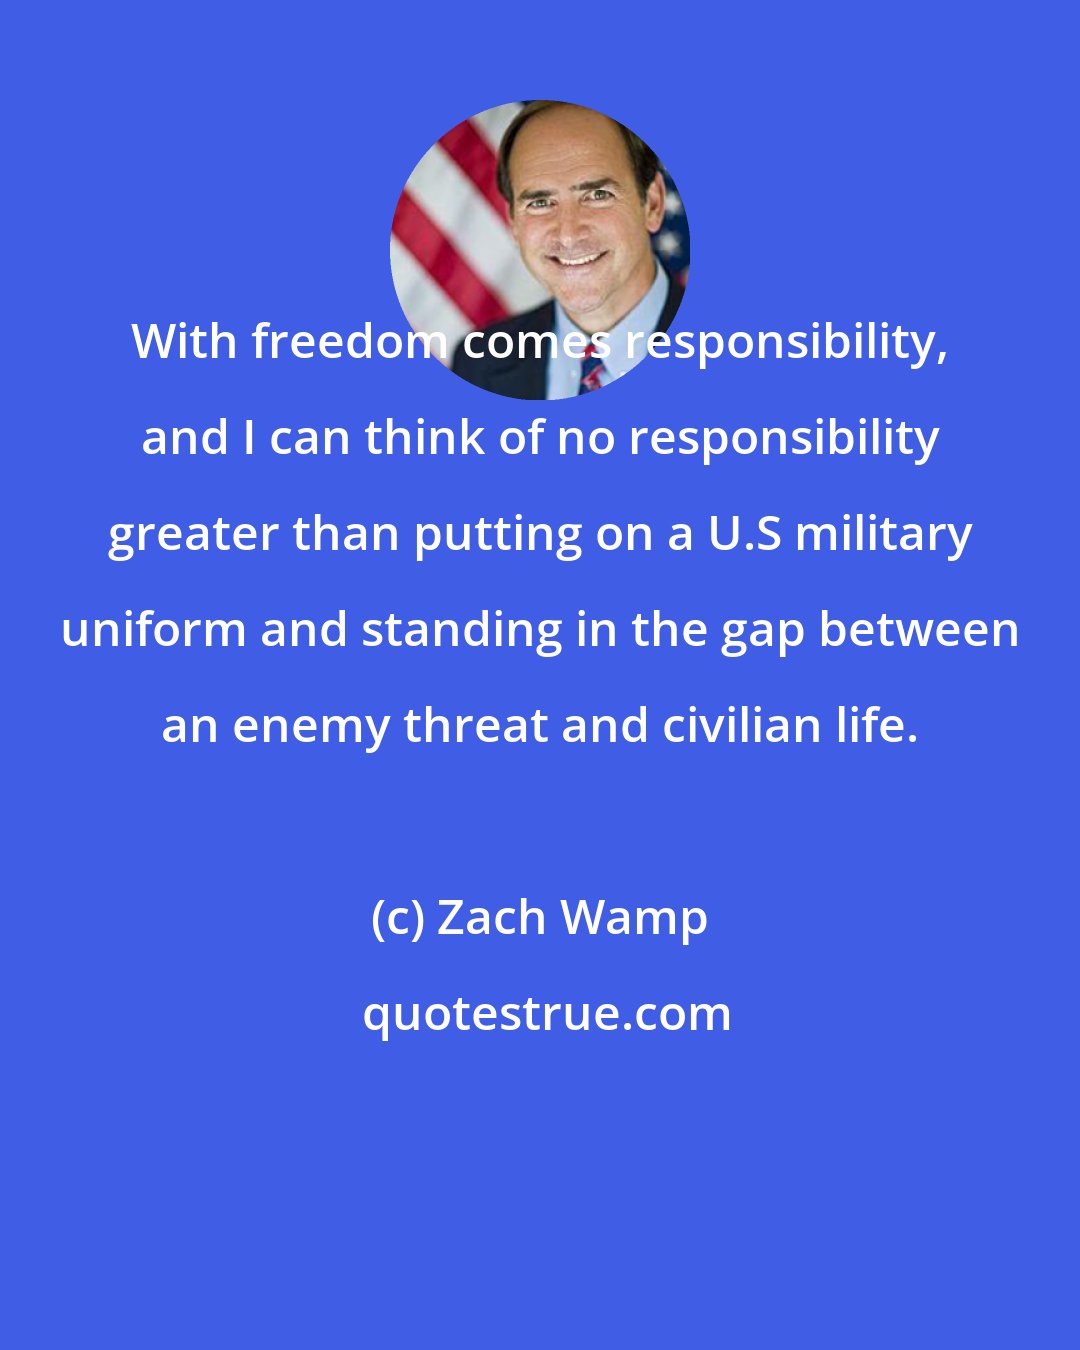 Zach Wamp: With freedom comes responsibility, and I can think of no responsibility greater than putting on a U.S military uniform and standing in the gap between an enemy threat and civilian life.